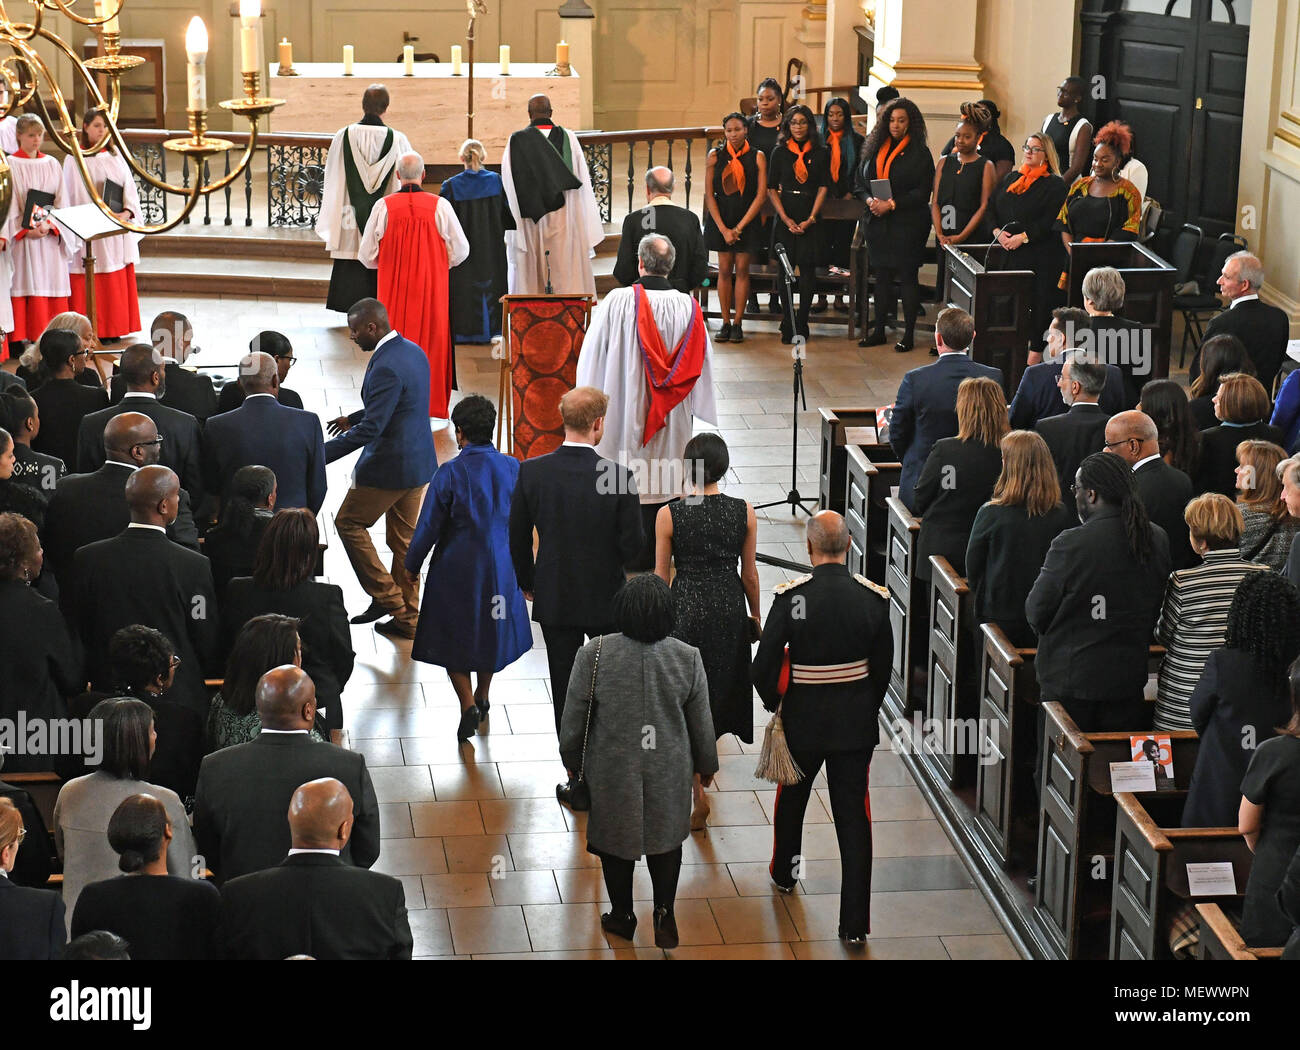 Baroness Lawrence with Prince Harry and Meghan Markle walk down the isle as they arrive for a memorial service at St Martin-in-the-Fields in Trafalgar Square, London, to commemorate the 25th anniversary of the murder of Stephen Lawrence. Stock Photo